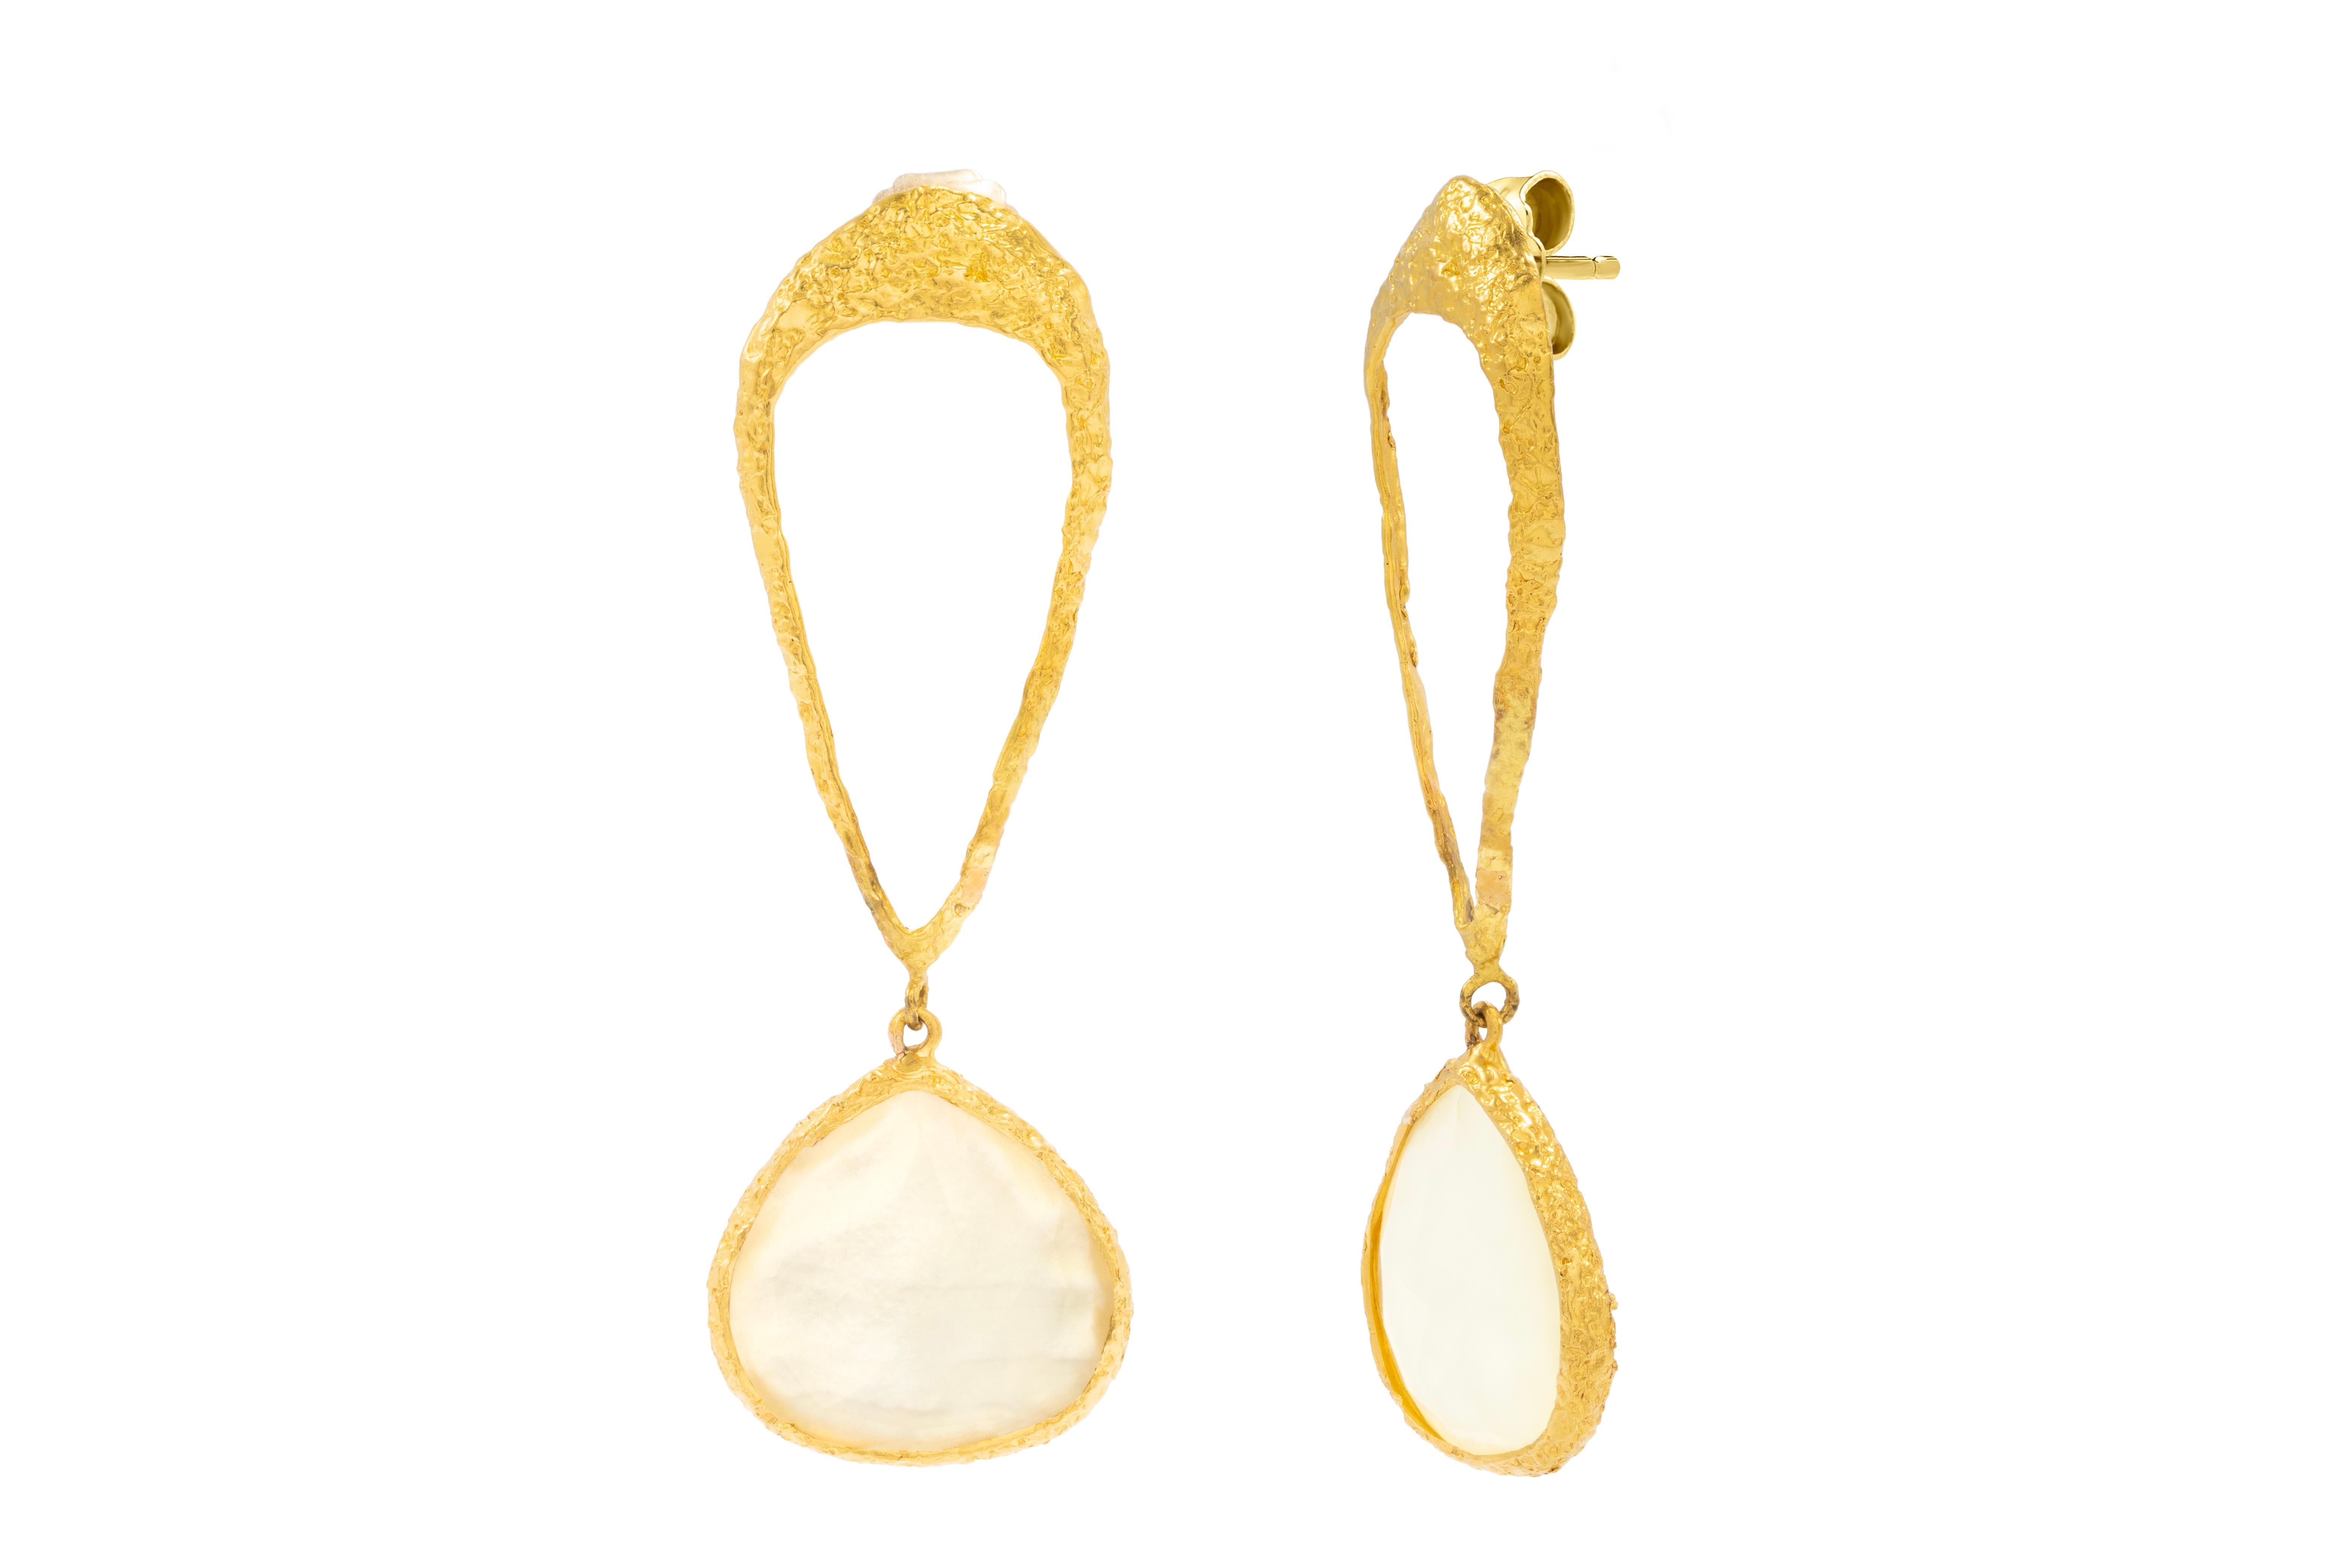 Artisan Soleil 22k Gold Pearl and Crystal Signature Teardrop Earrings, by Tagili For Sale